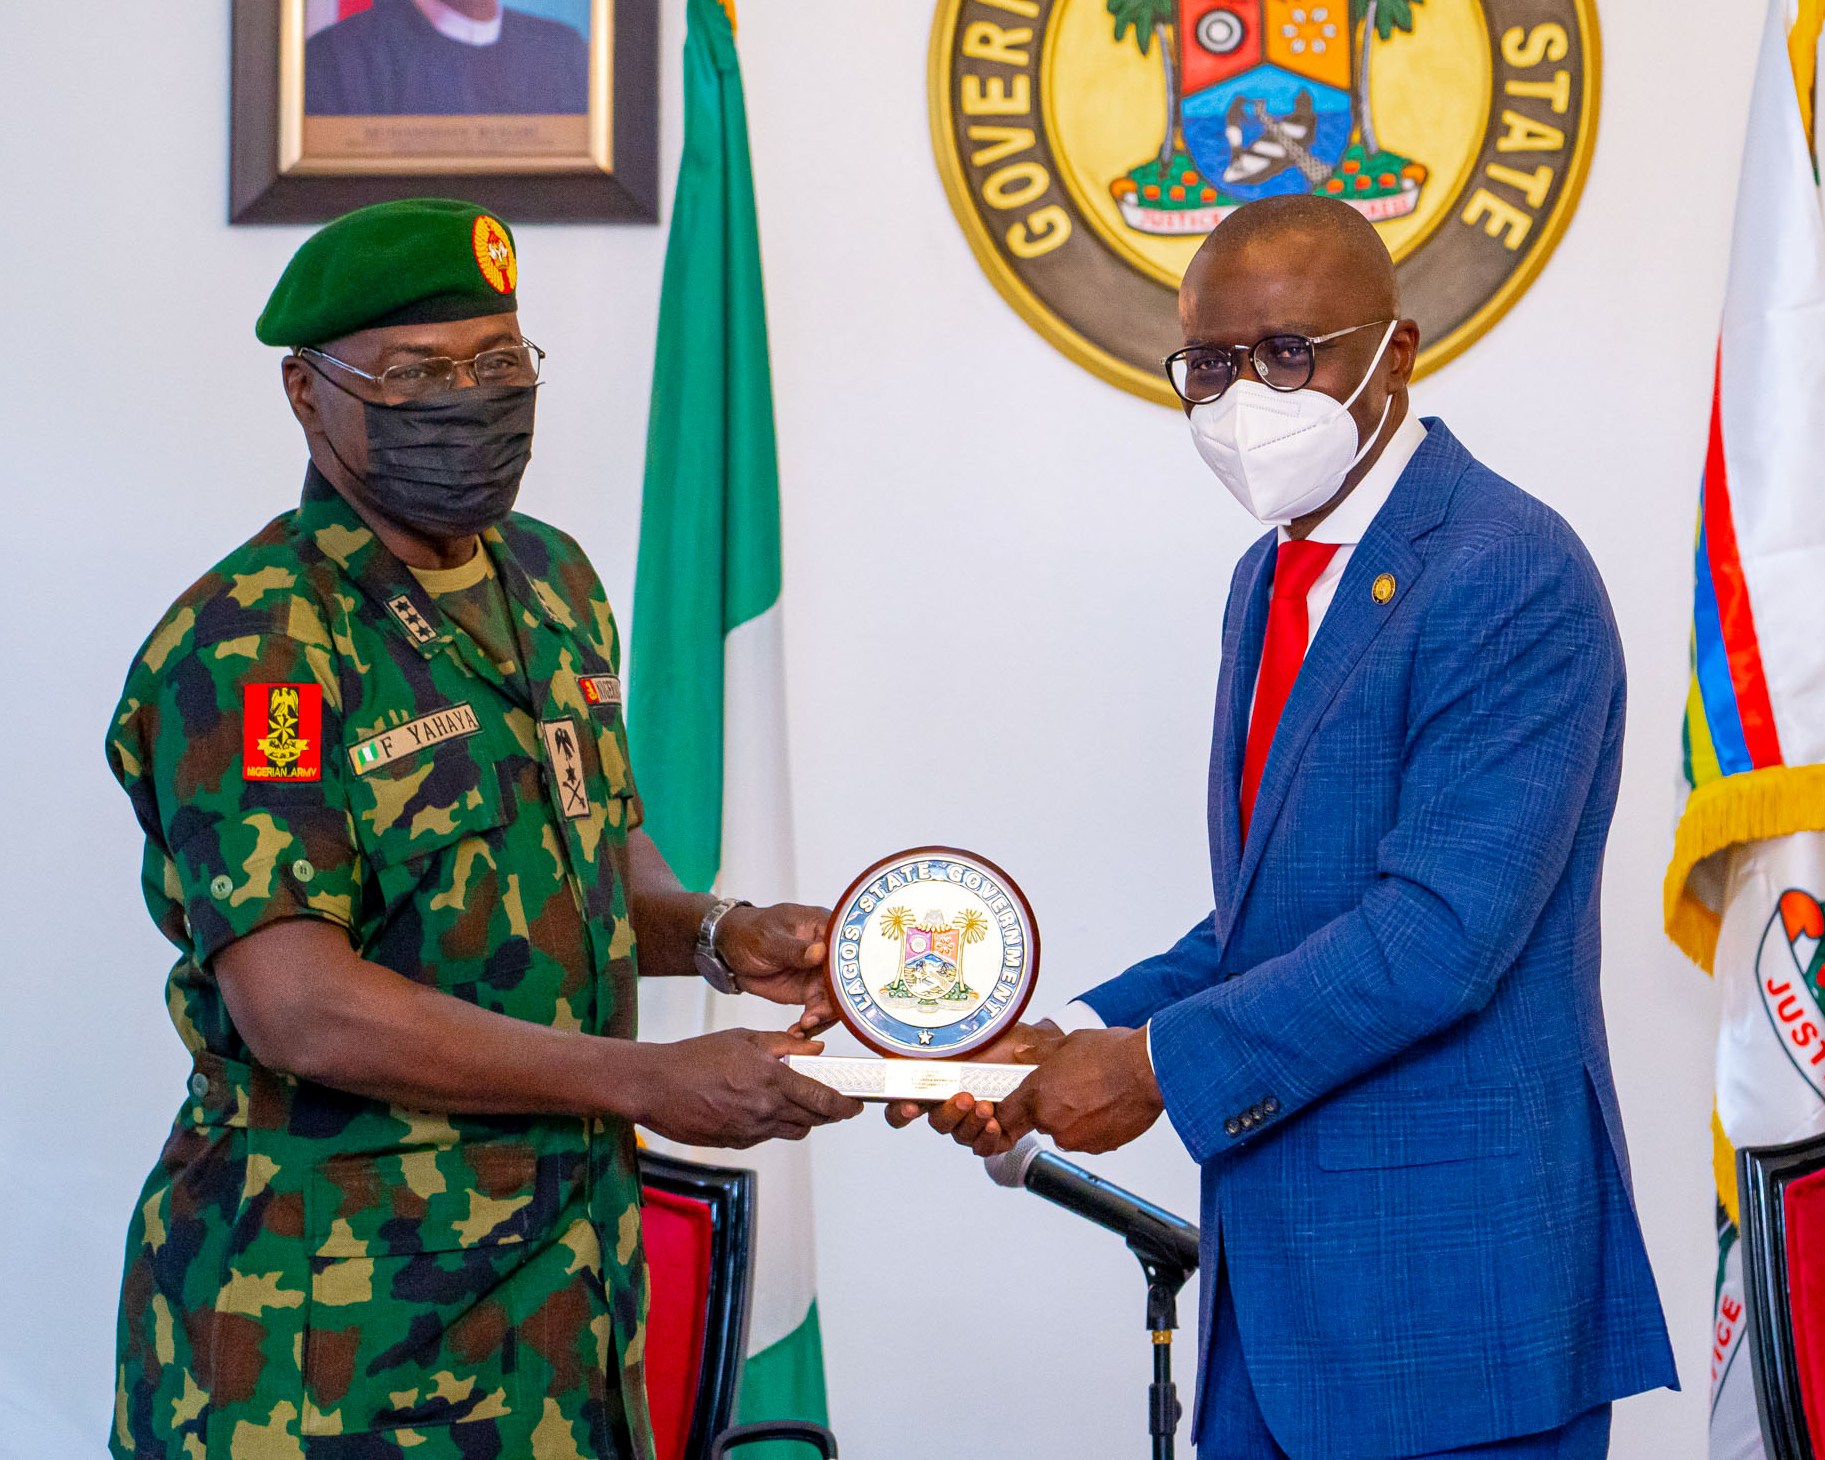 SECURITY OF LAGOS MUST REMAIN THE MILITARY’S PRIORITY - SANWO-OLU